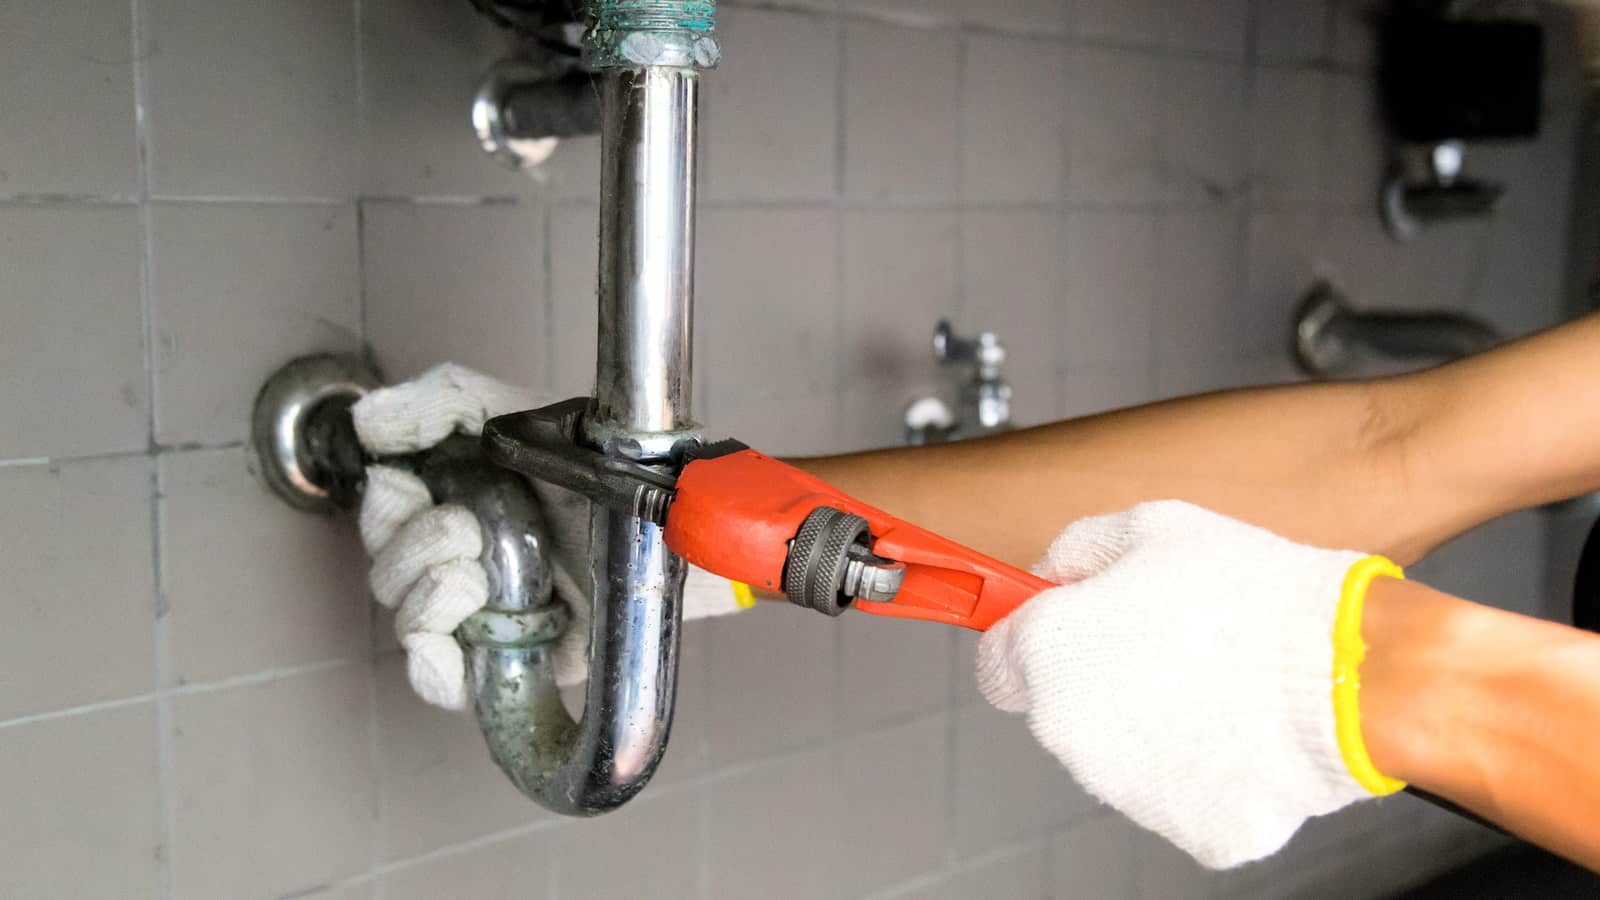 Lesters Plumbing Service of Youngsville